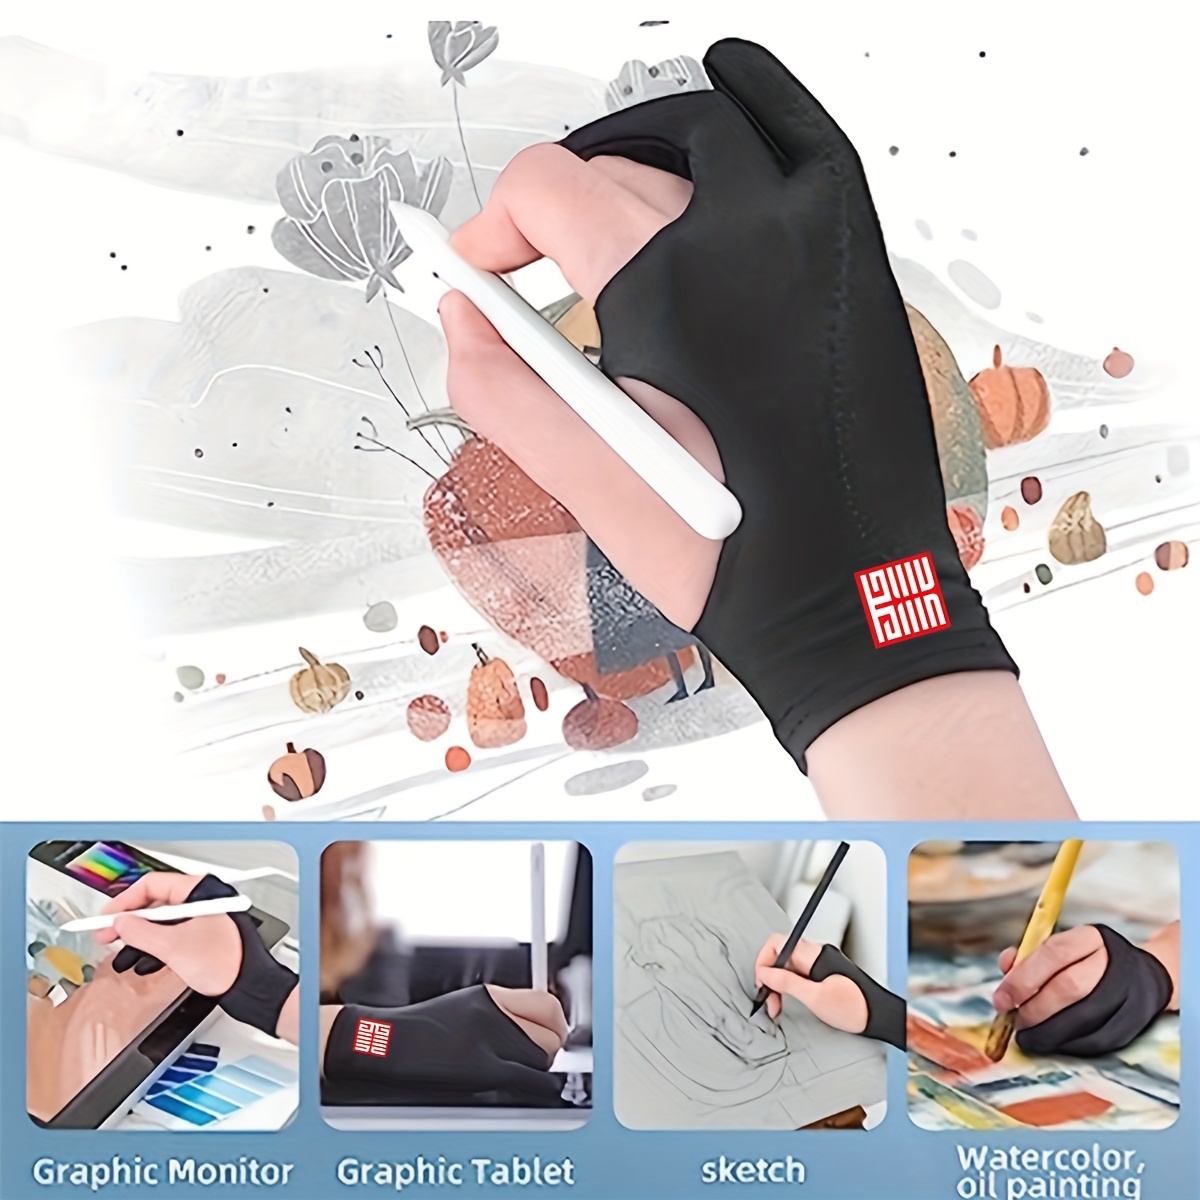 Cheap Digital Artist Glove Black 2 Finger Anti-fouling Gloves For  Drawing/Painting/Graphic 1Pc Durable